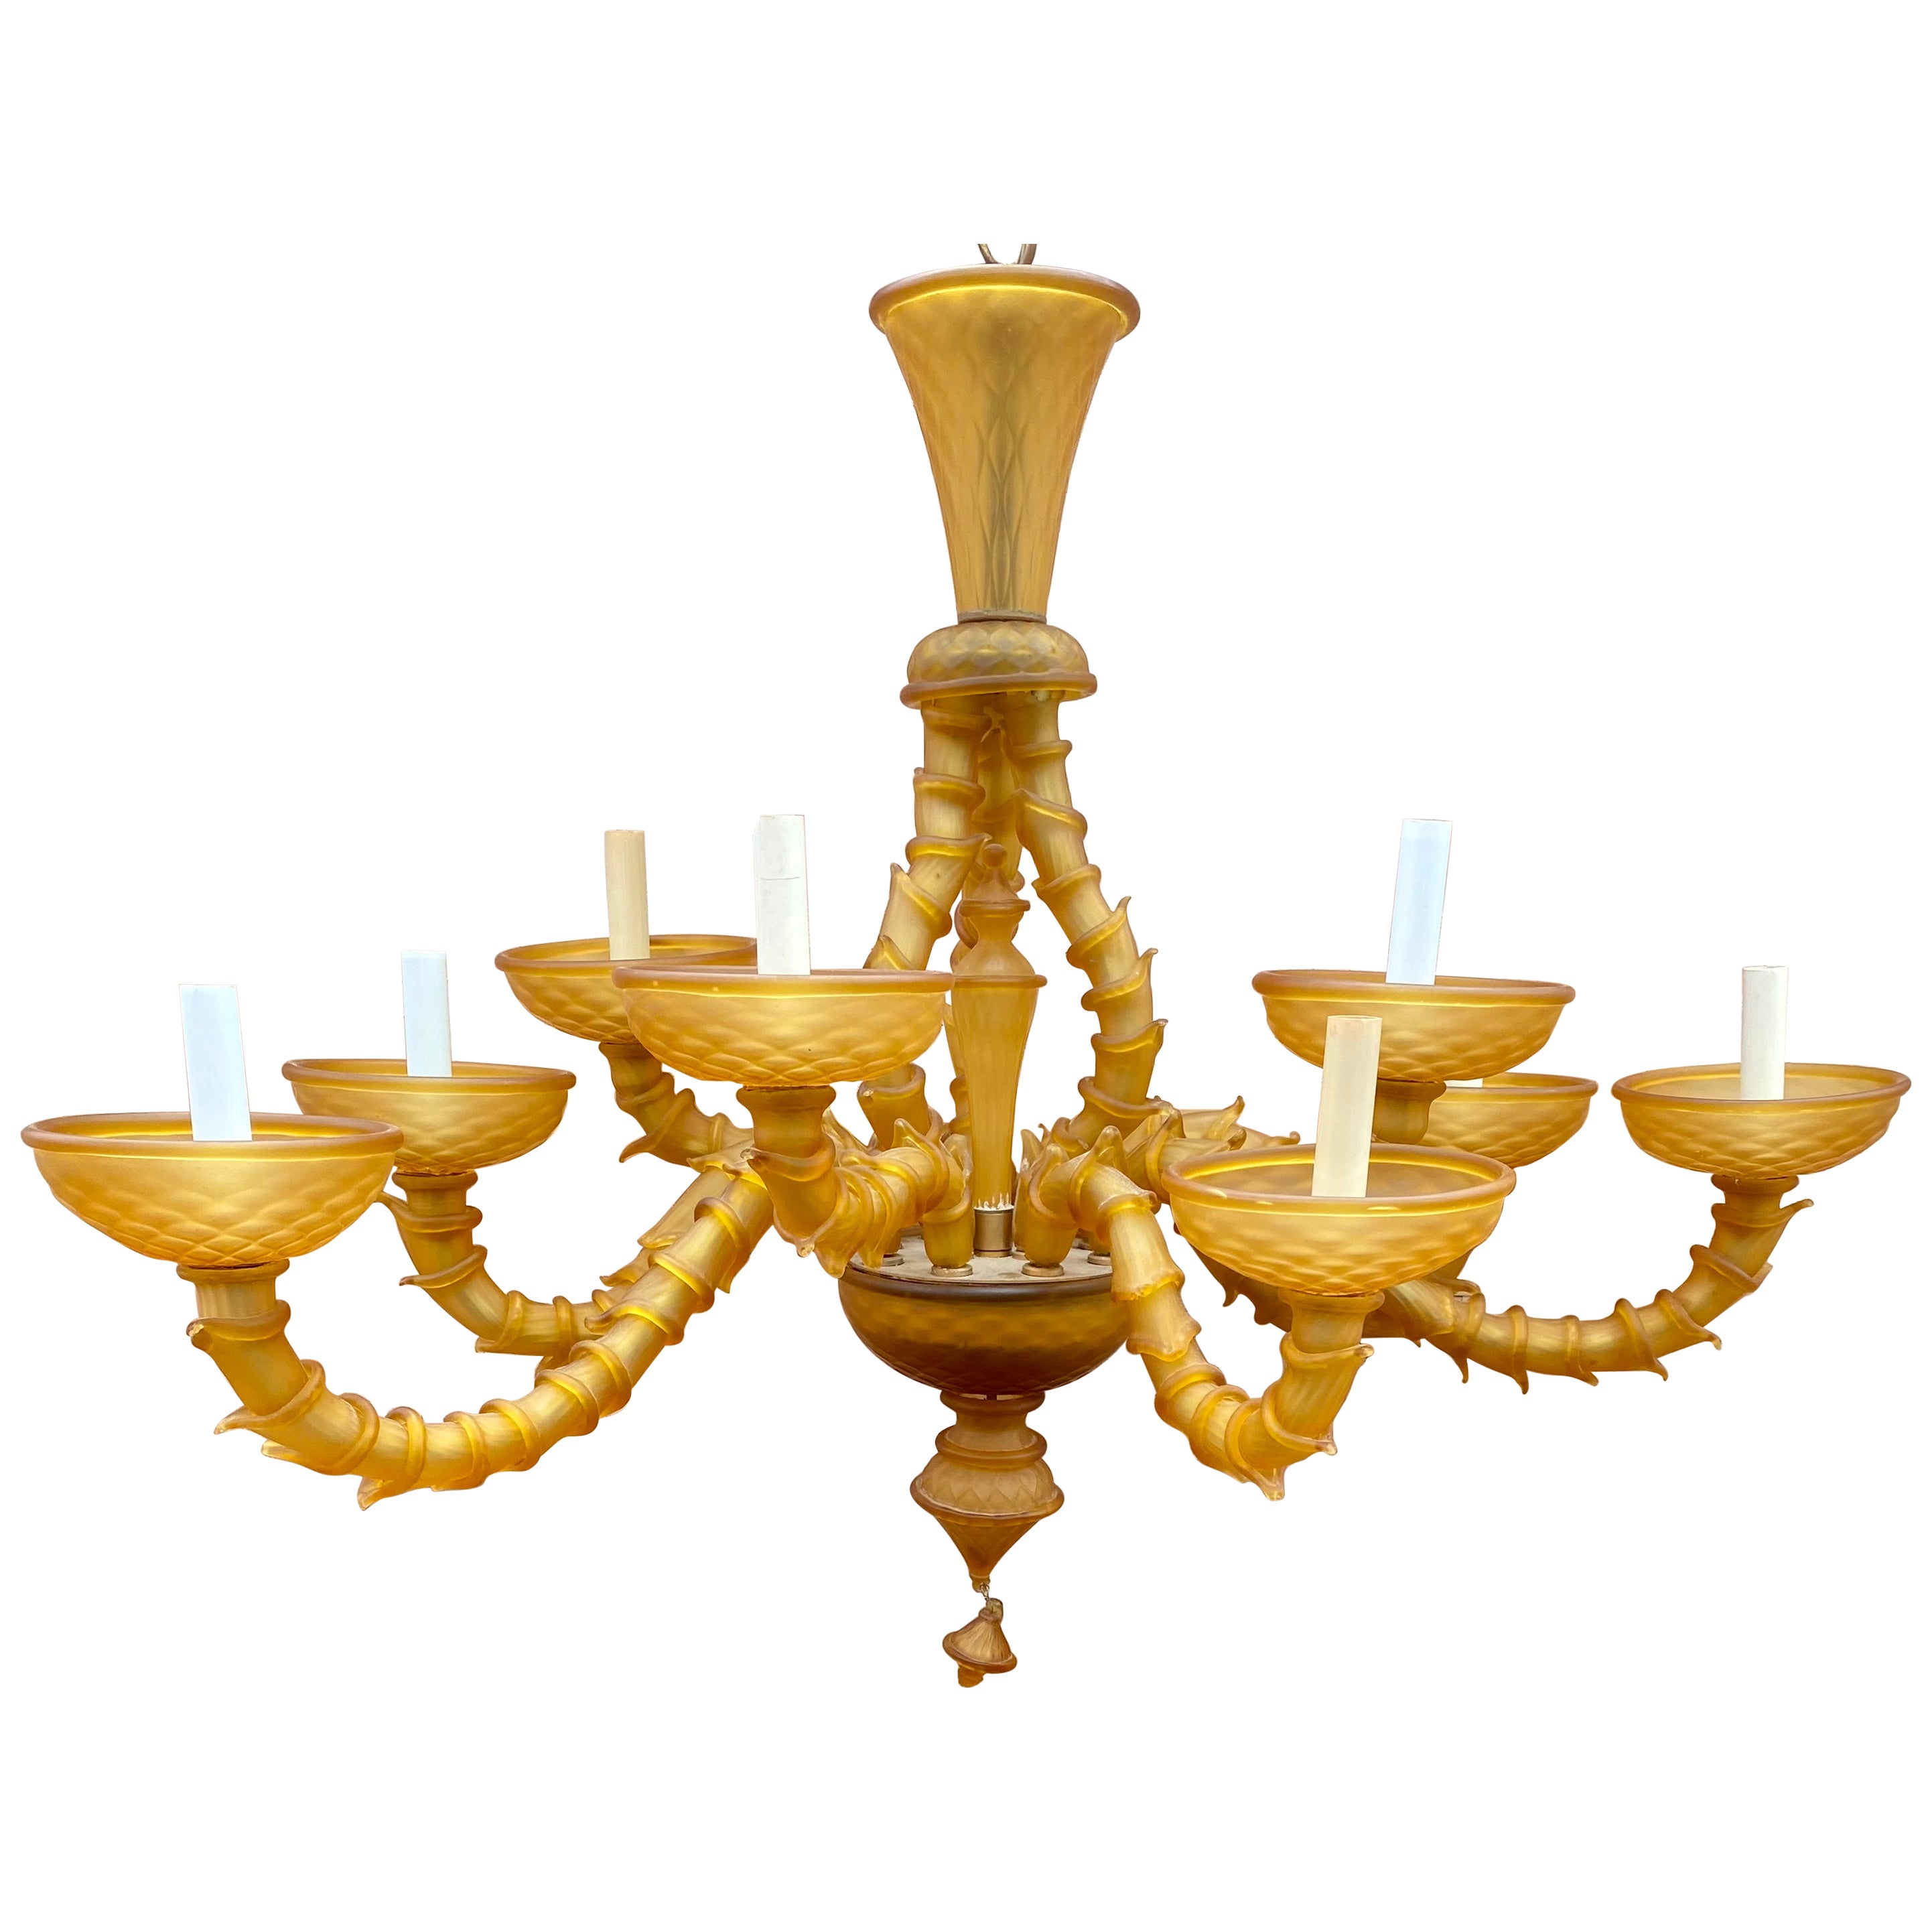 Italian Venetian Murano 1940s Frosted Tulip Fluted Amber Glass Chandelier For Sale